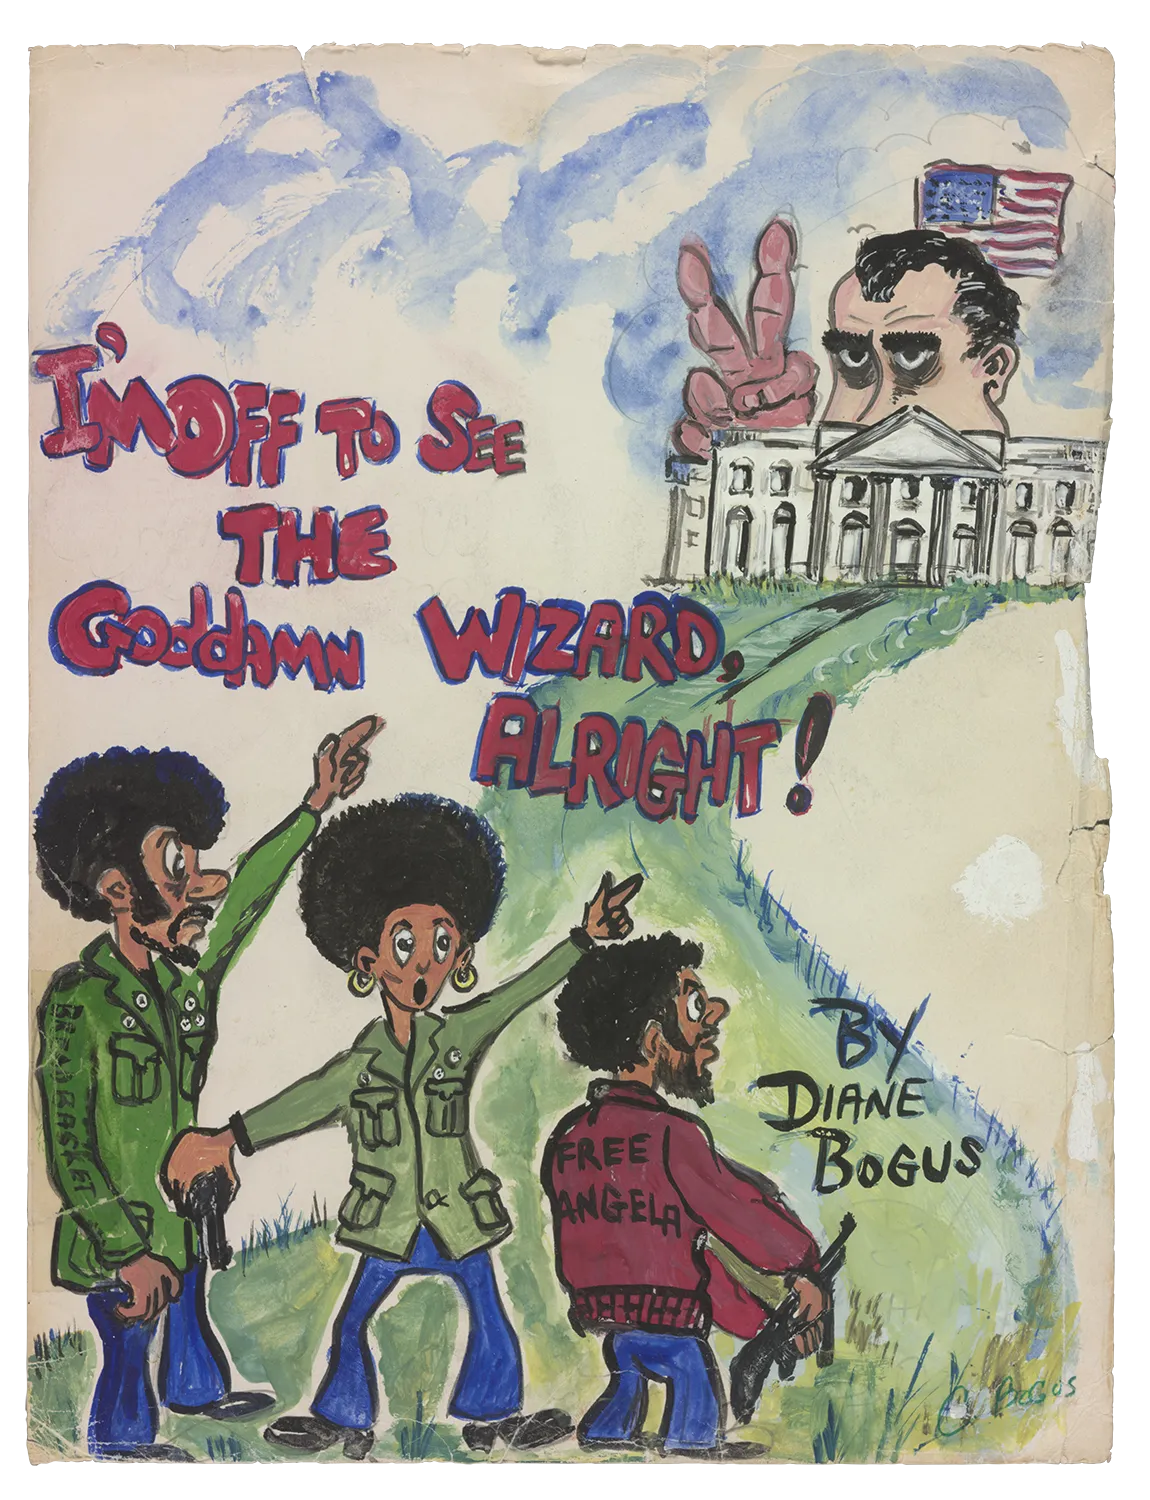 A hand-drawn color illustration by SDiane Bogus of three Black activists in the foreground. They are standing on a path and pointing towards the White House in the distance. The words “Free Angela” and “Bread Basket” are written on their jackets. Richard Nixon peers out from behind the White House and is holding up a peace sign. Behind him is an American flag.